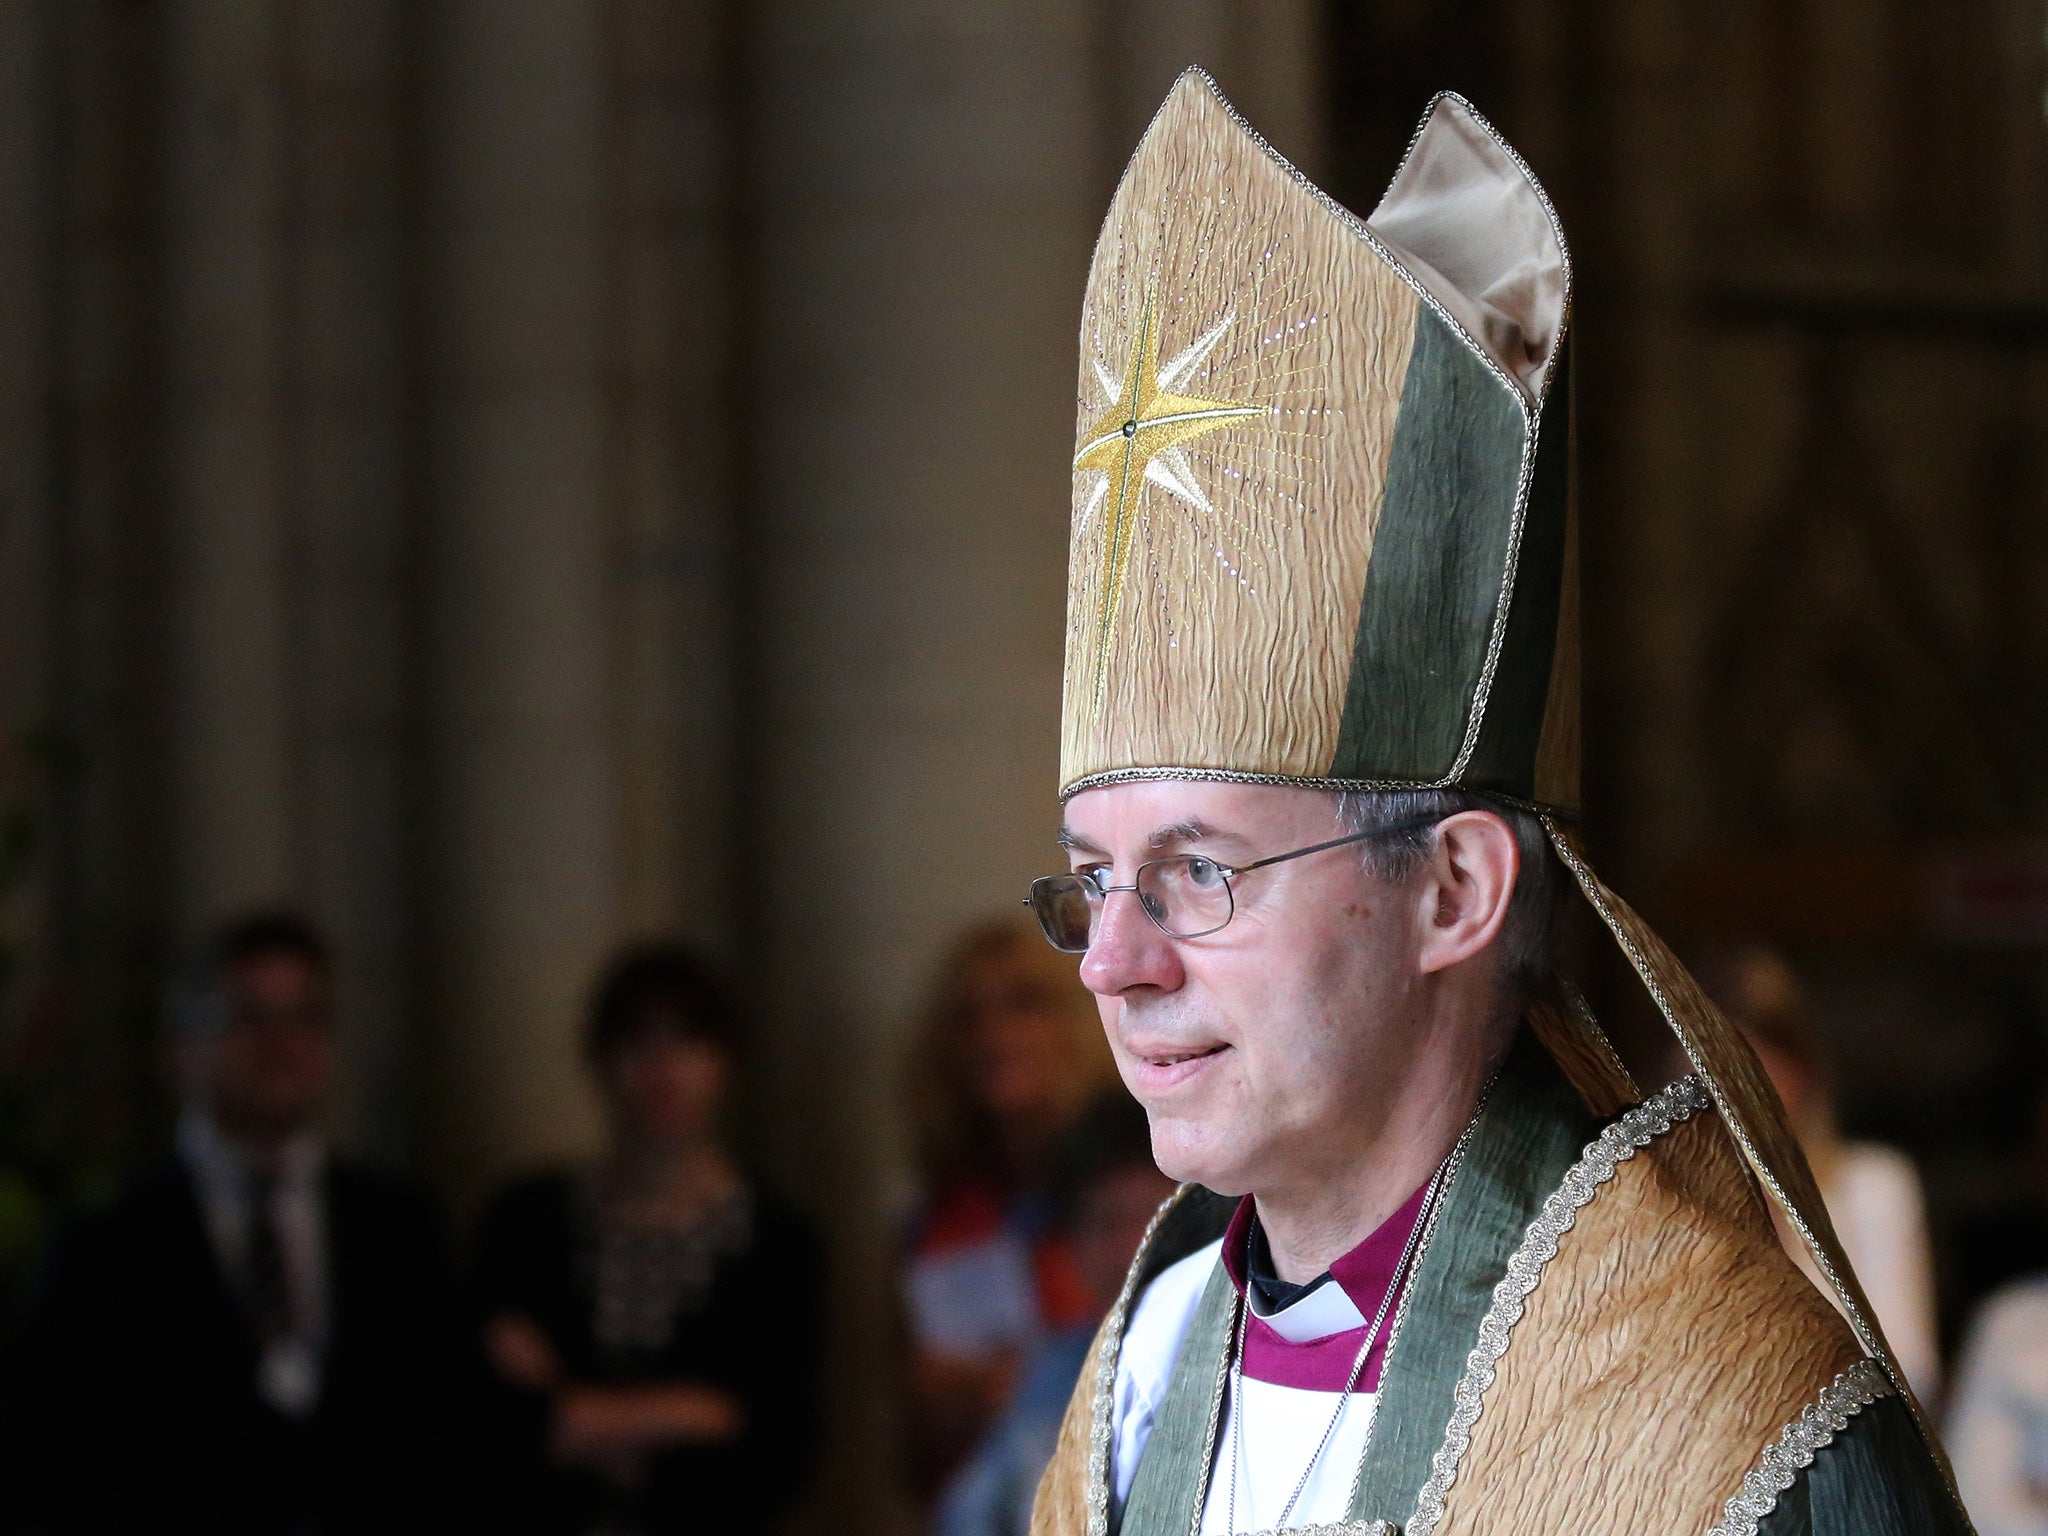 The Archbishop apologised for anti-Semitic comments made from within his own church